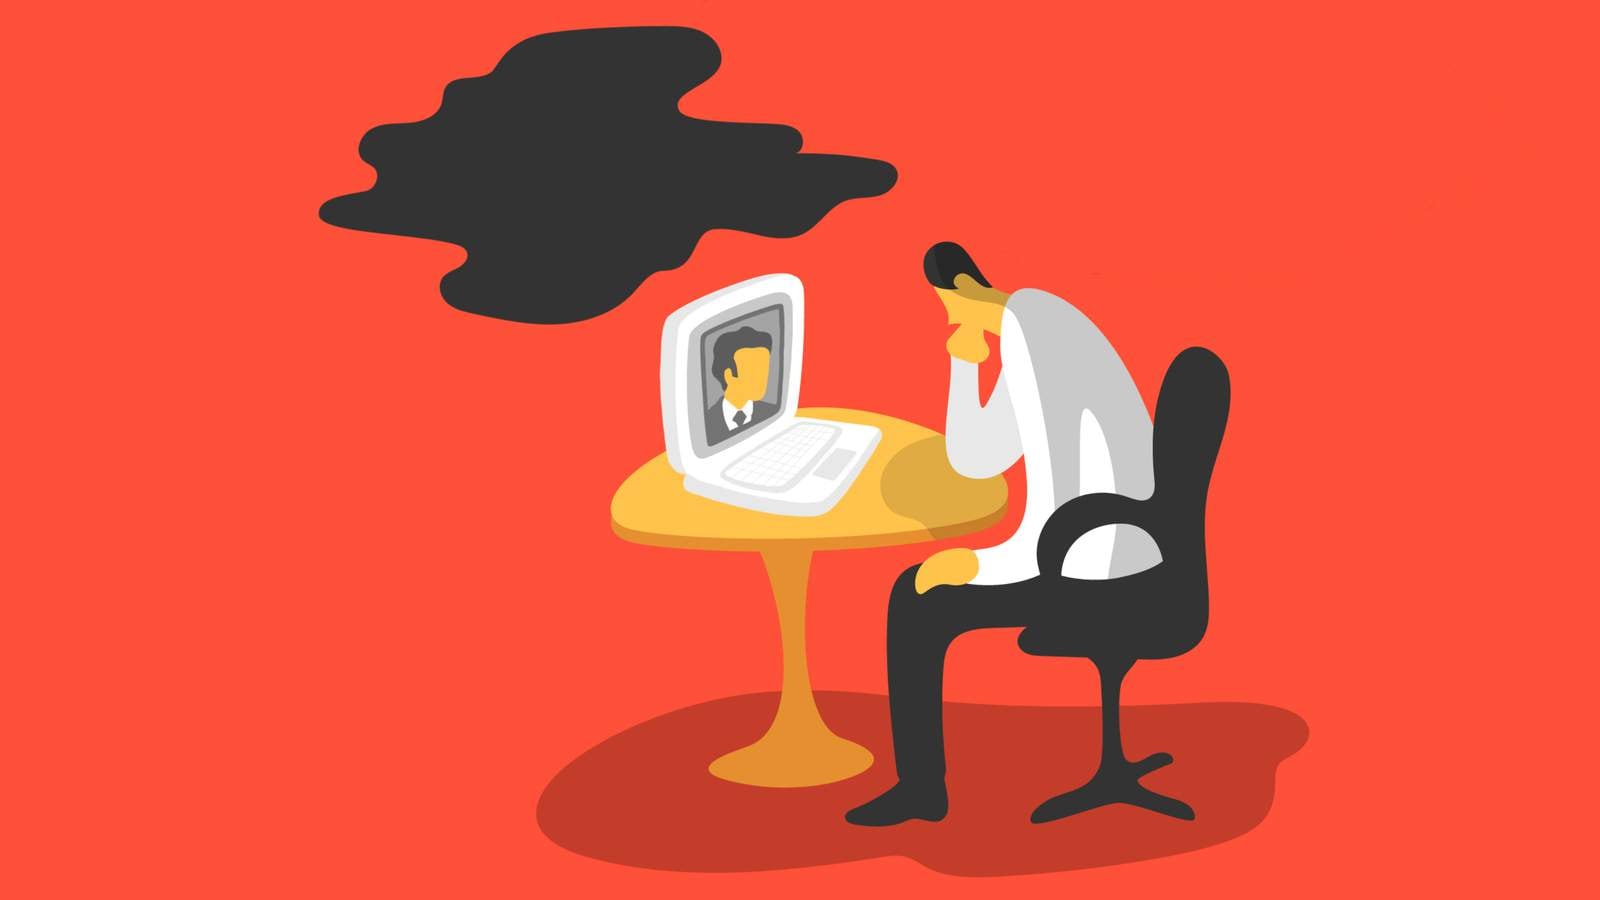 5 things managers should consider when laying off employees remotely